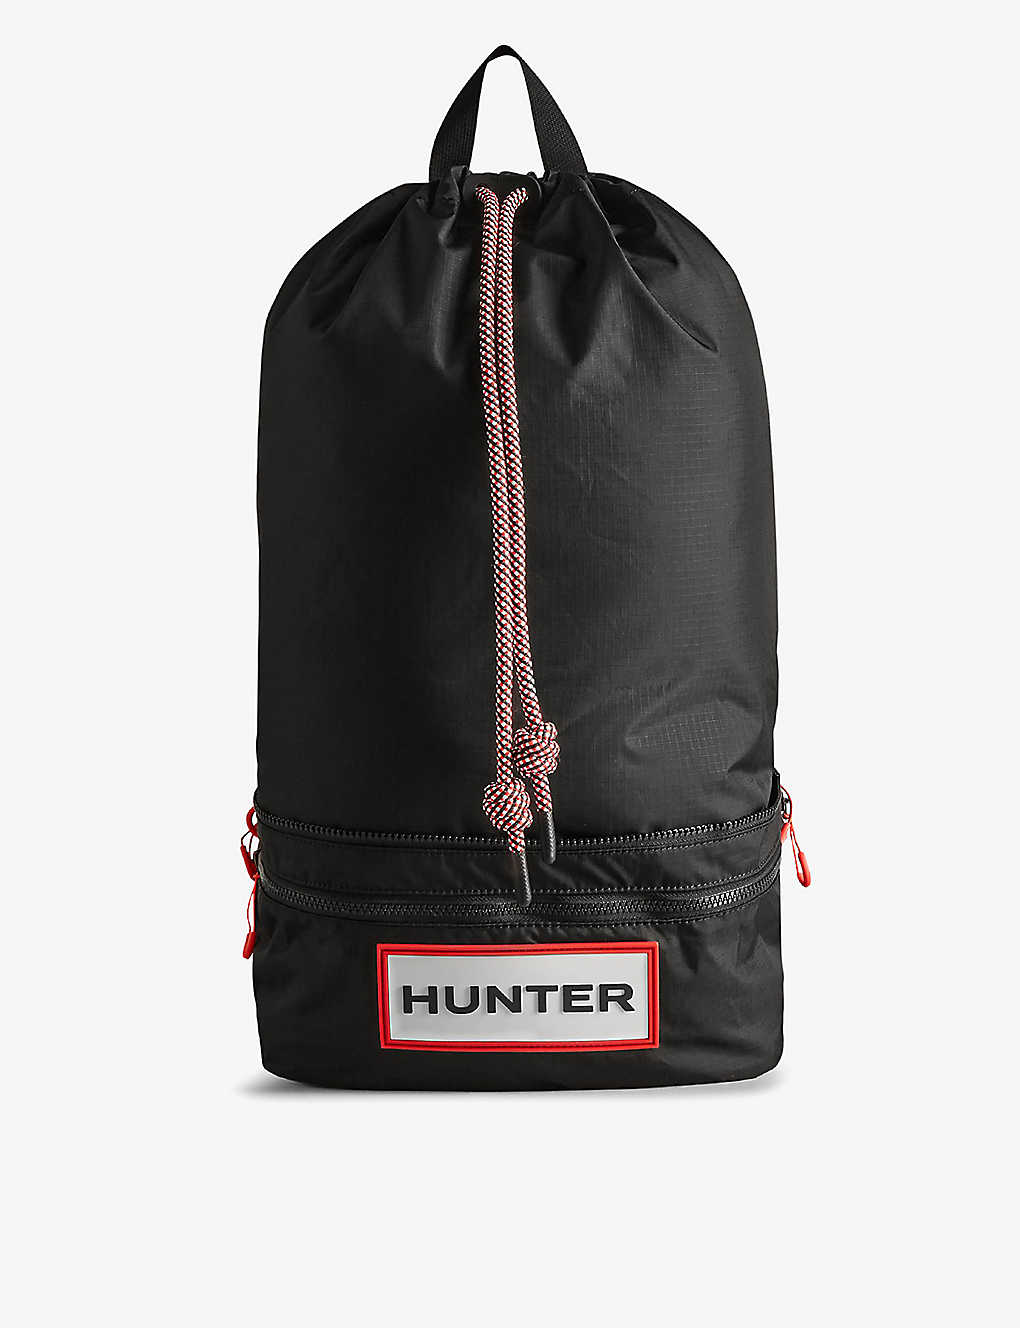 Hunter Travel Two-way Recycled-nylon Backpack In Black/red Box Logo